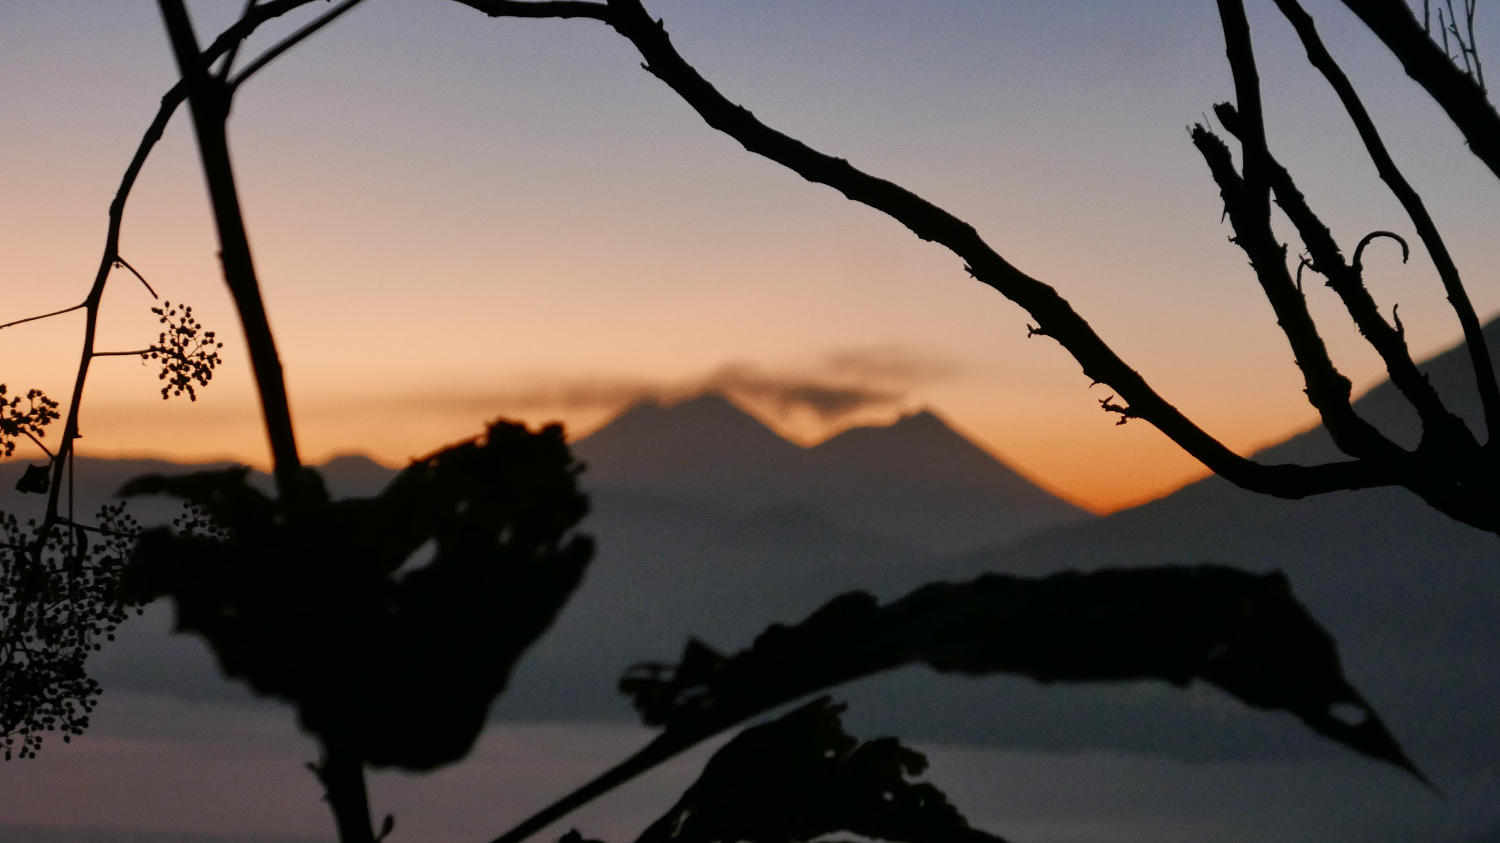 Just before sunrise at Lake Atitlan. Clouds hanging over Fuego volcano